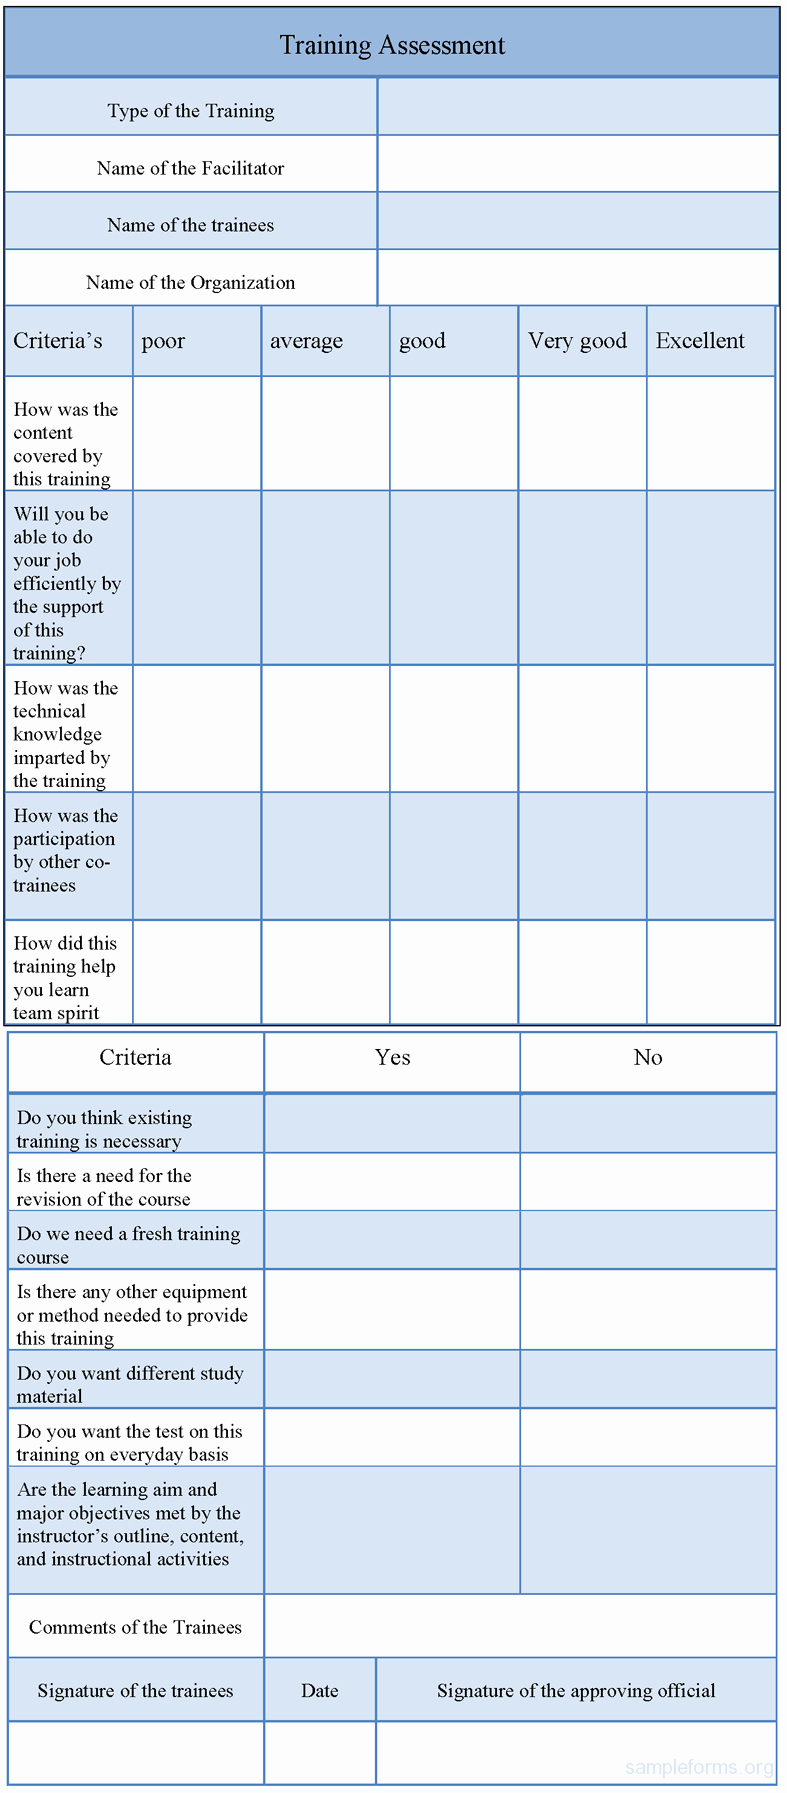 Training assessment form Sample forms